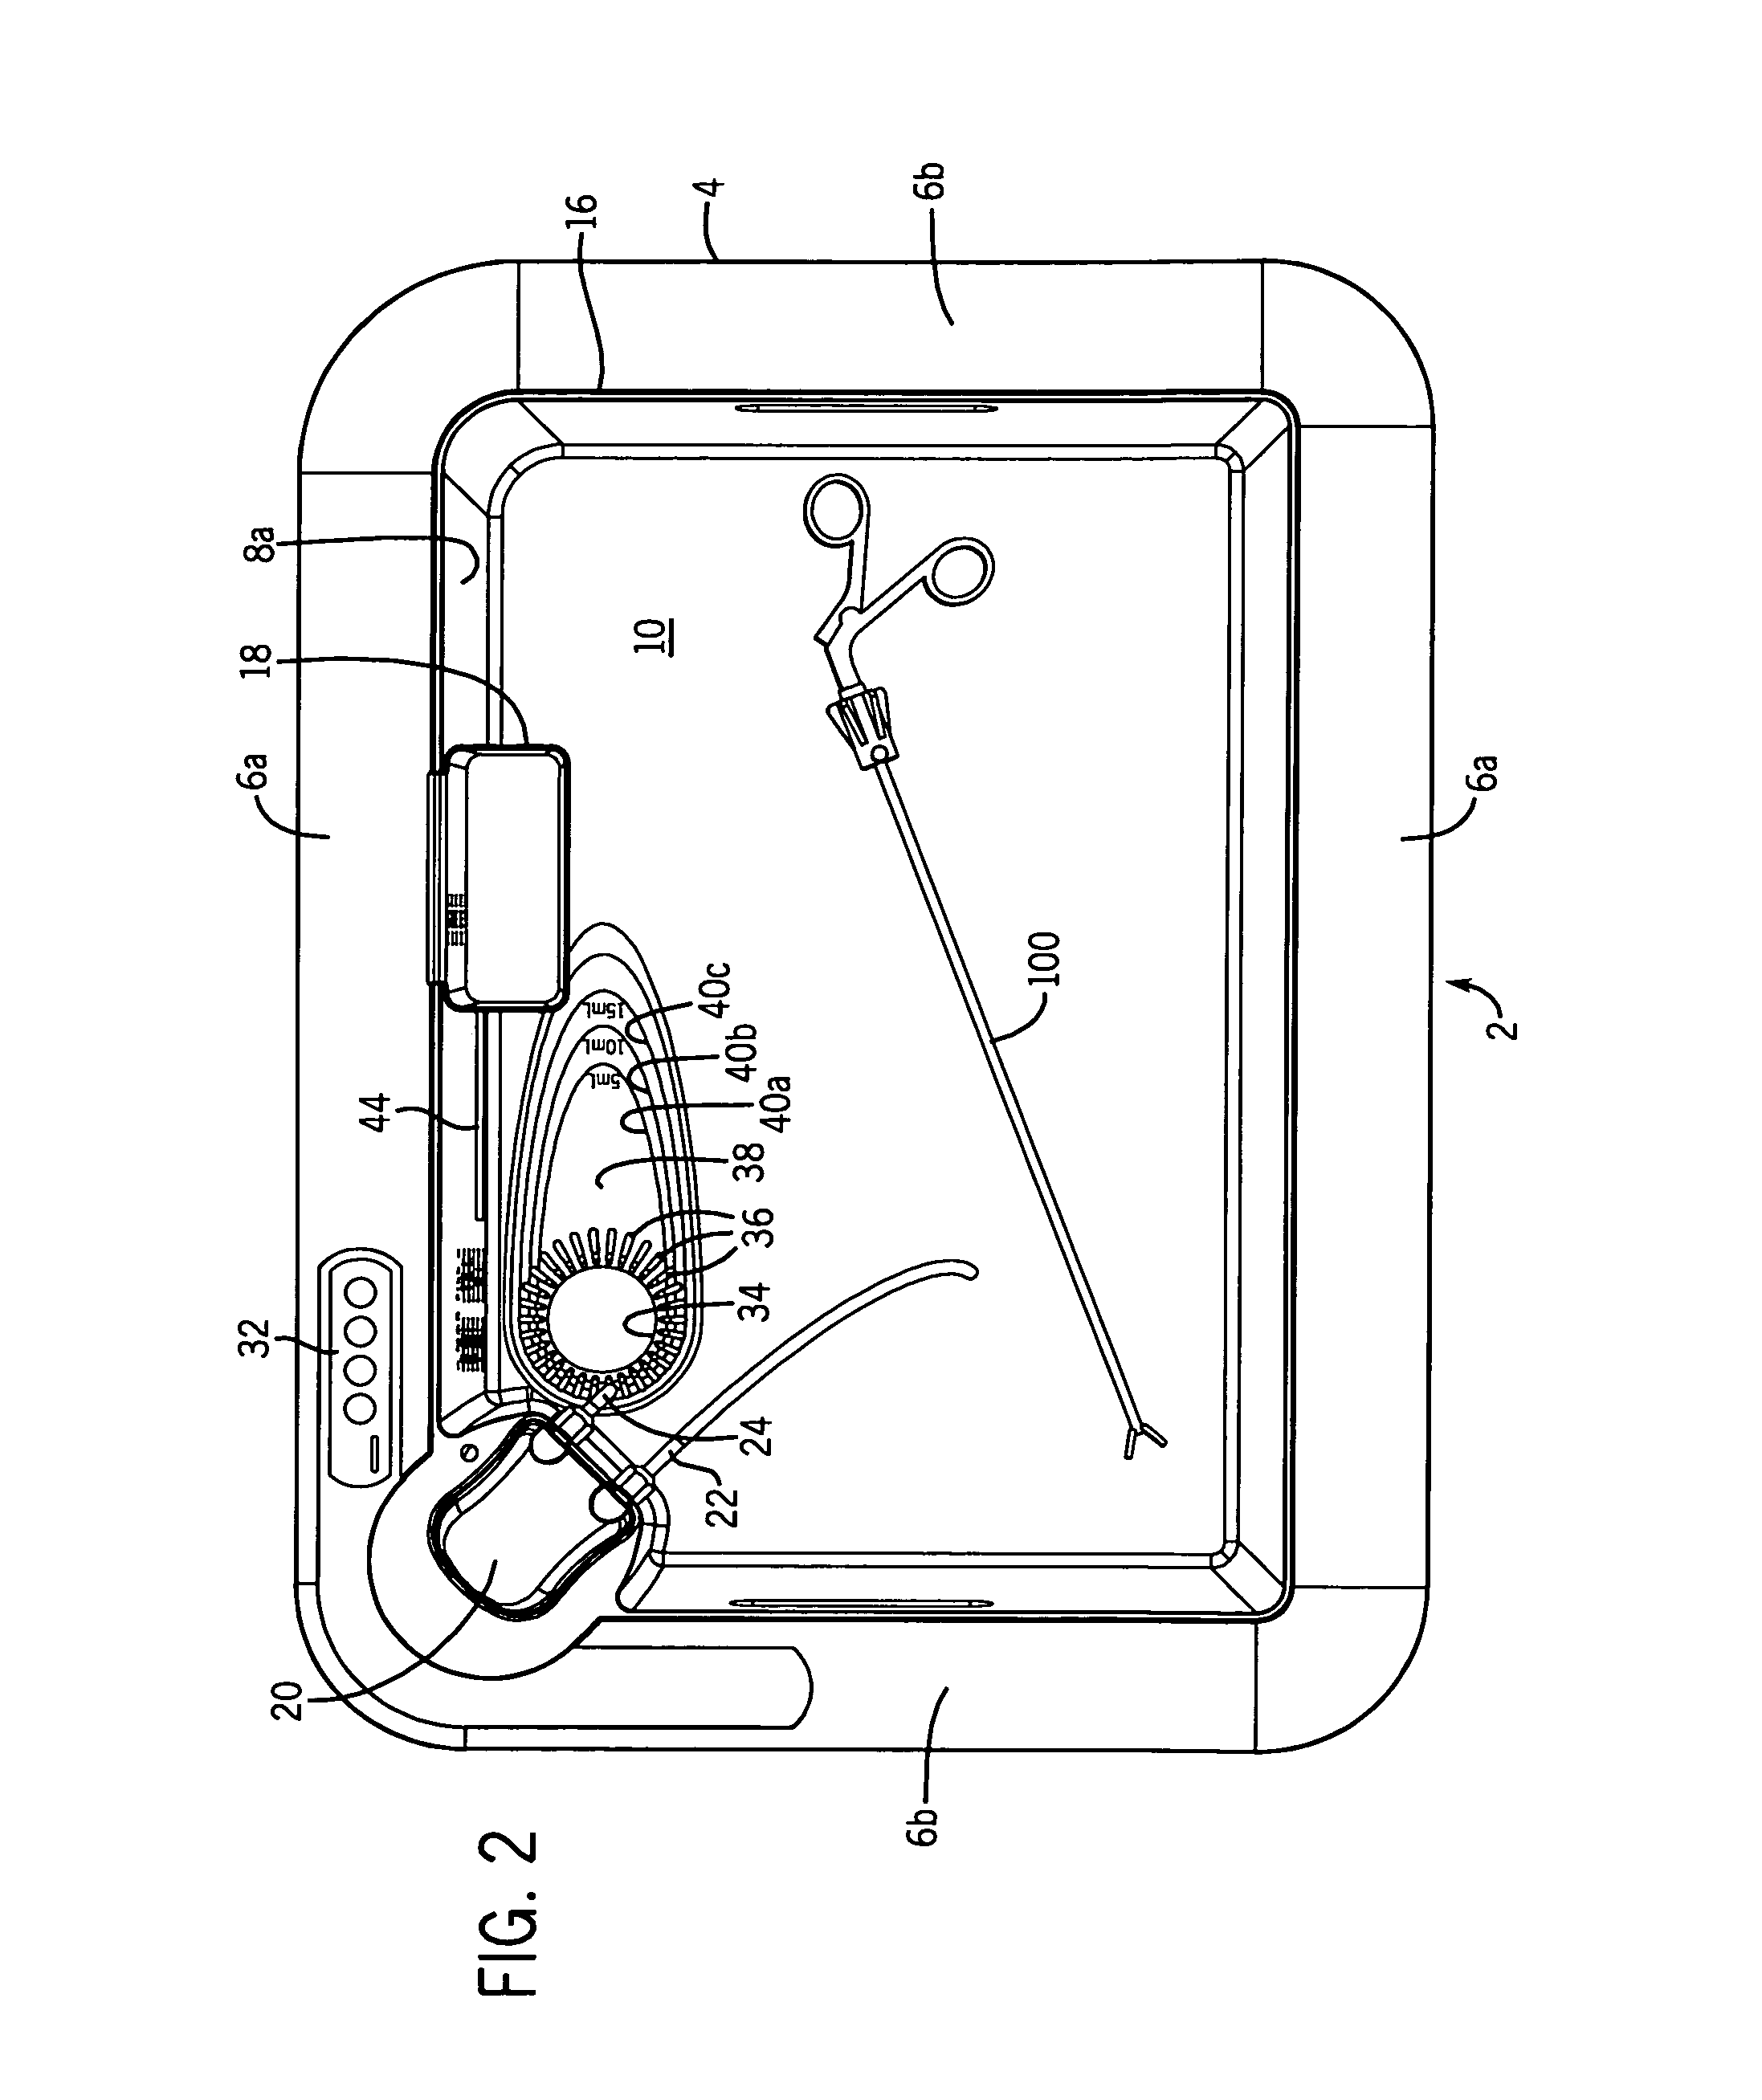 Sink insert for cleaning a medical or surgical device